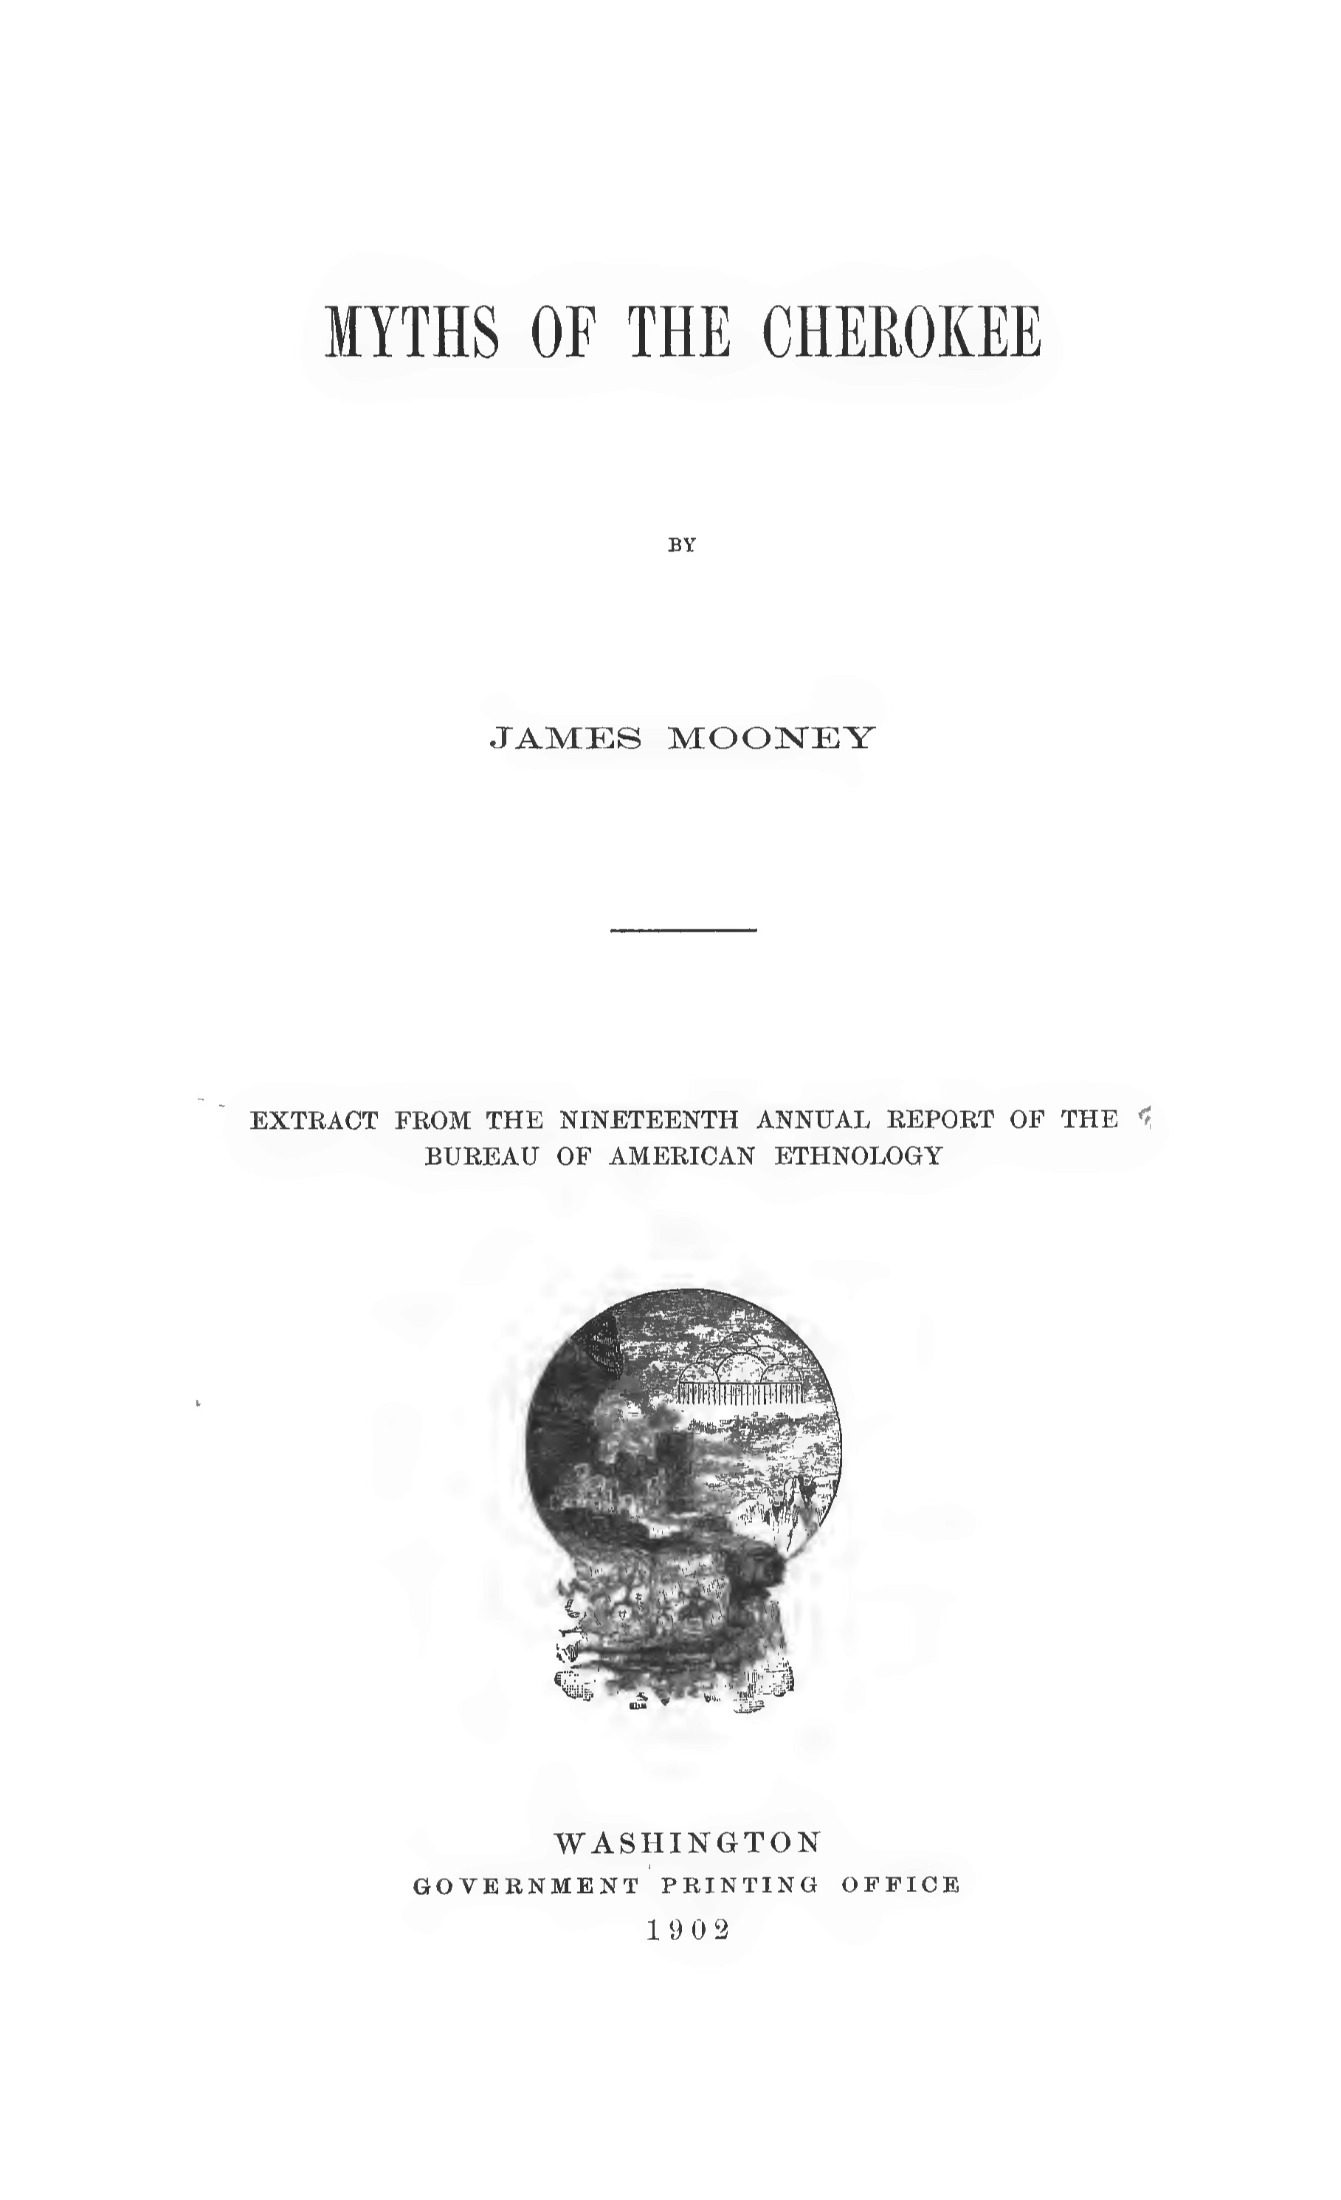 Main text cover